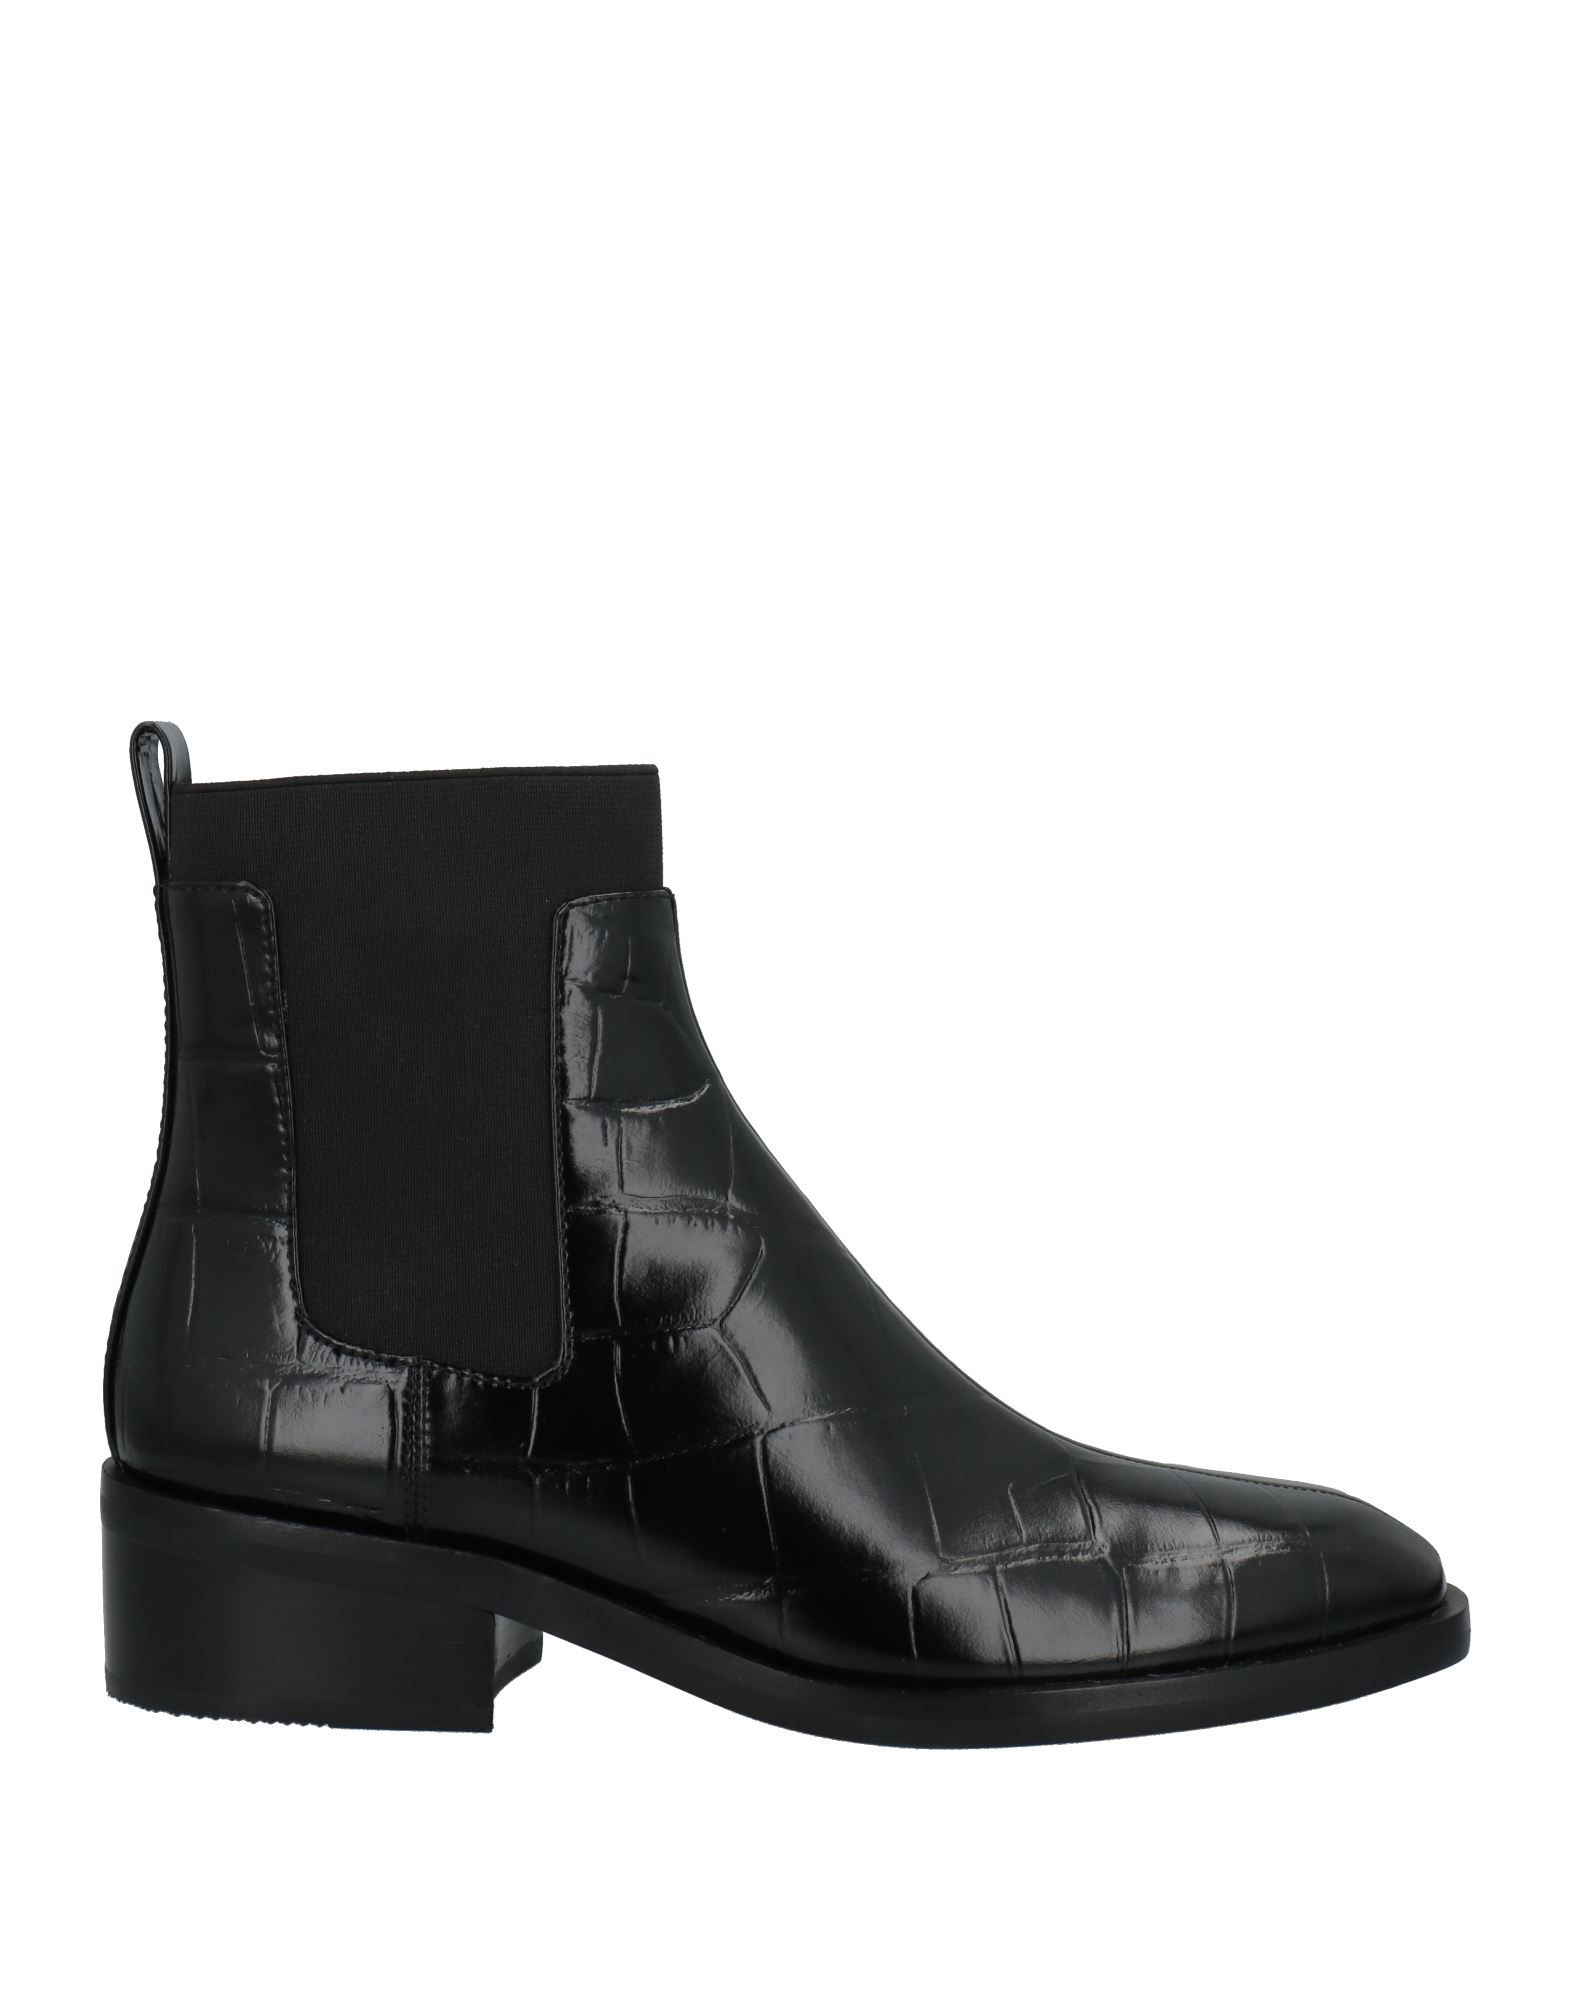 3.1 PHILLIP LIM Ankle boots | YOOX (US)